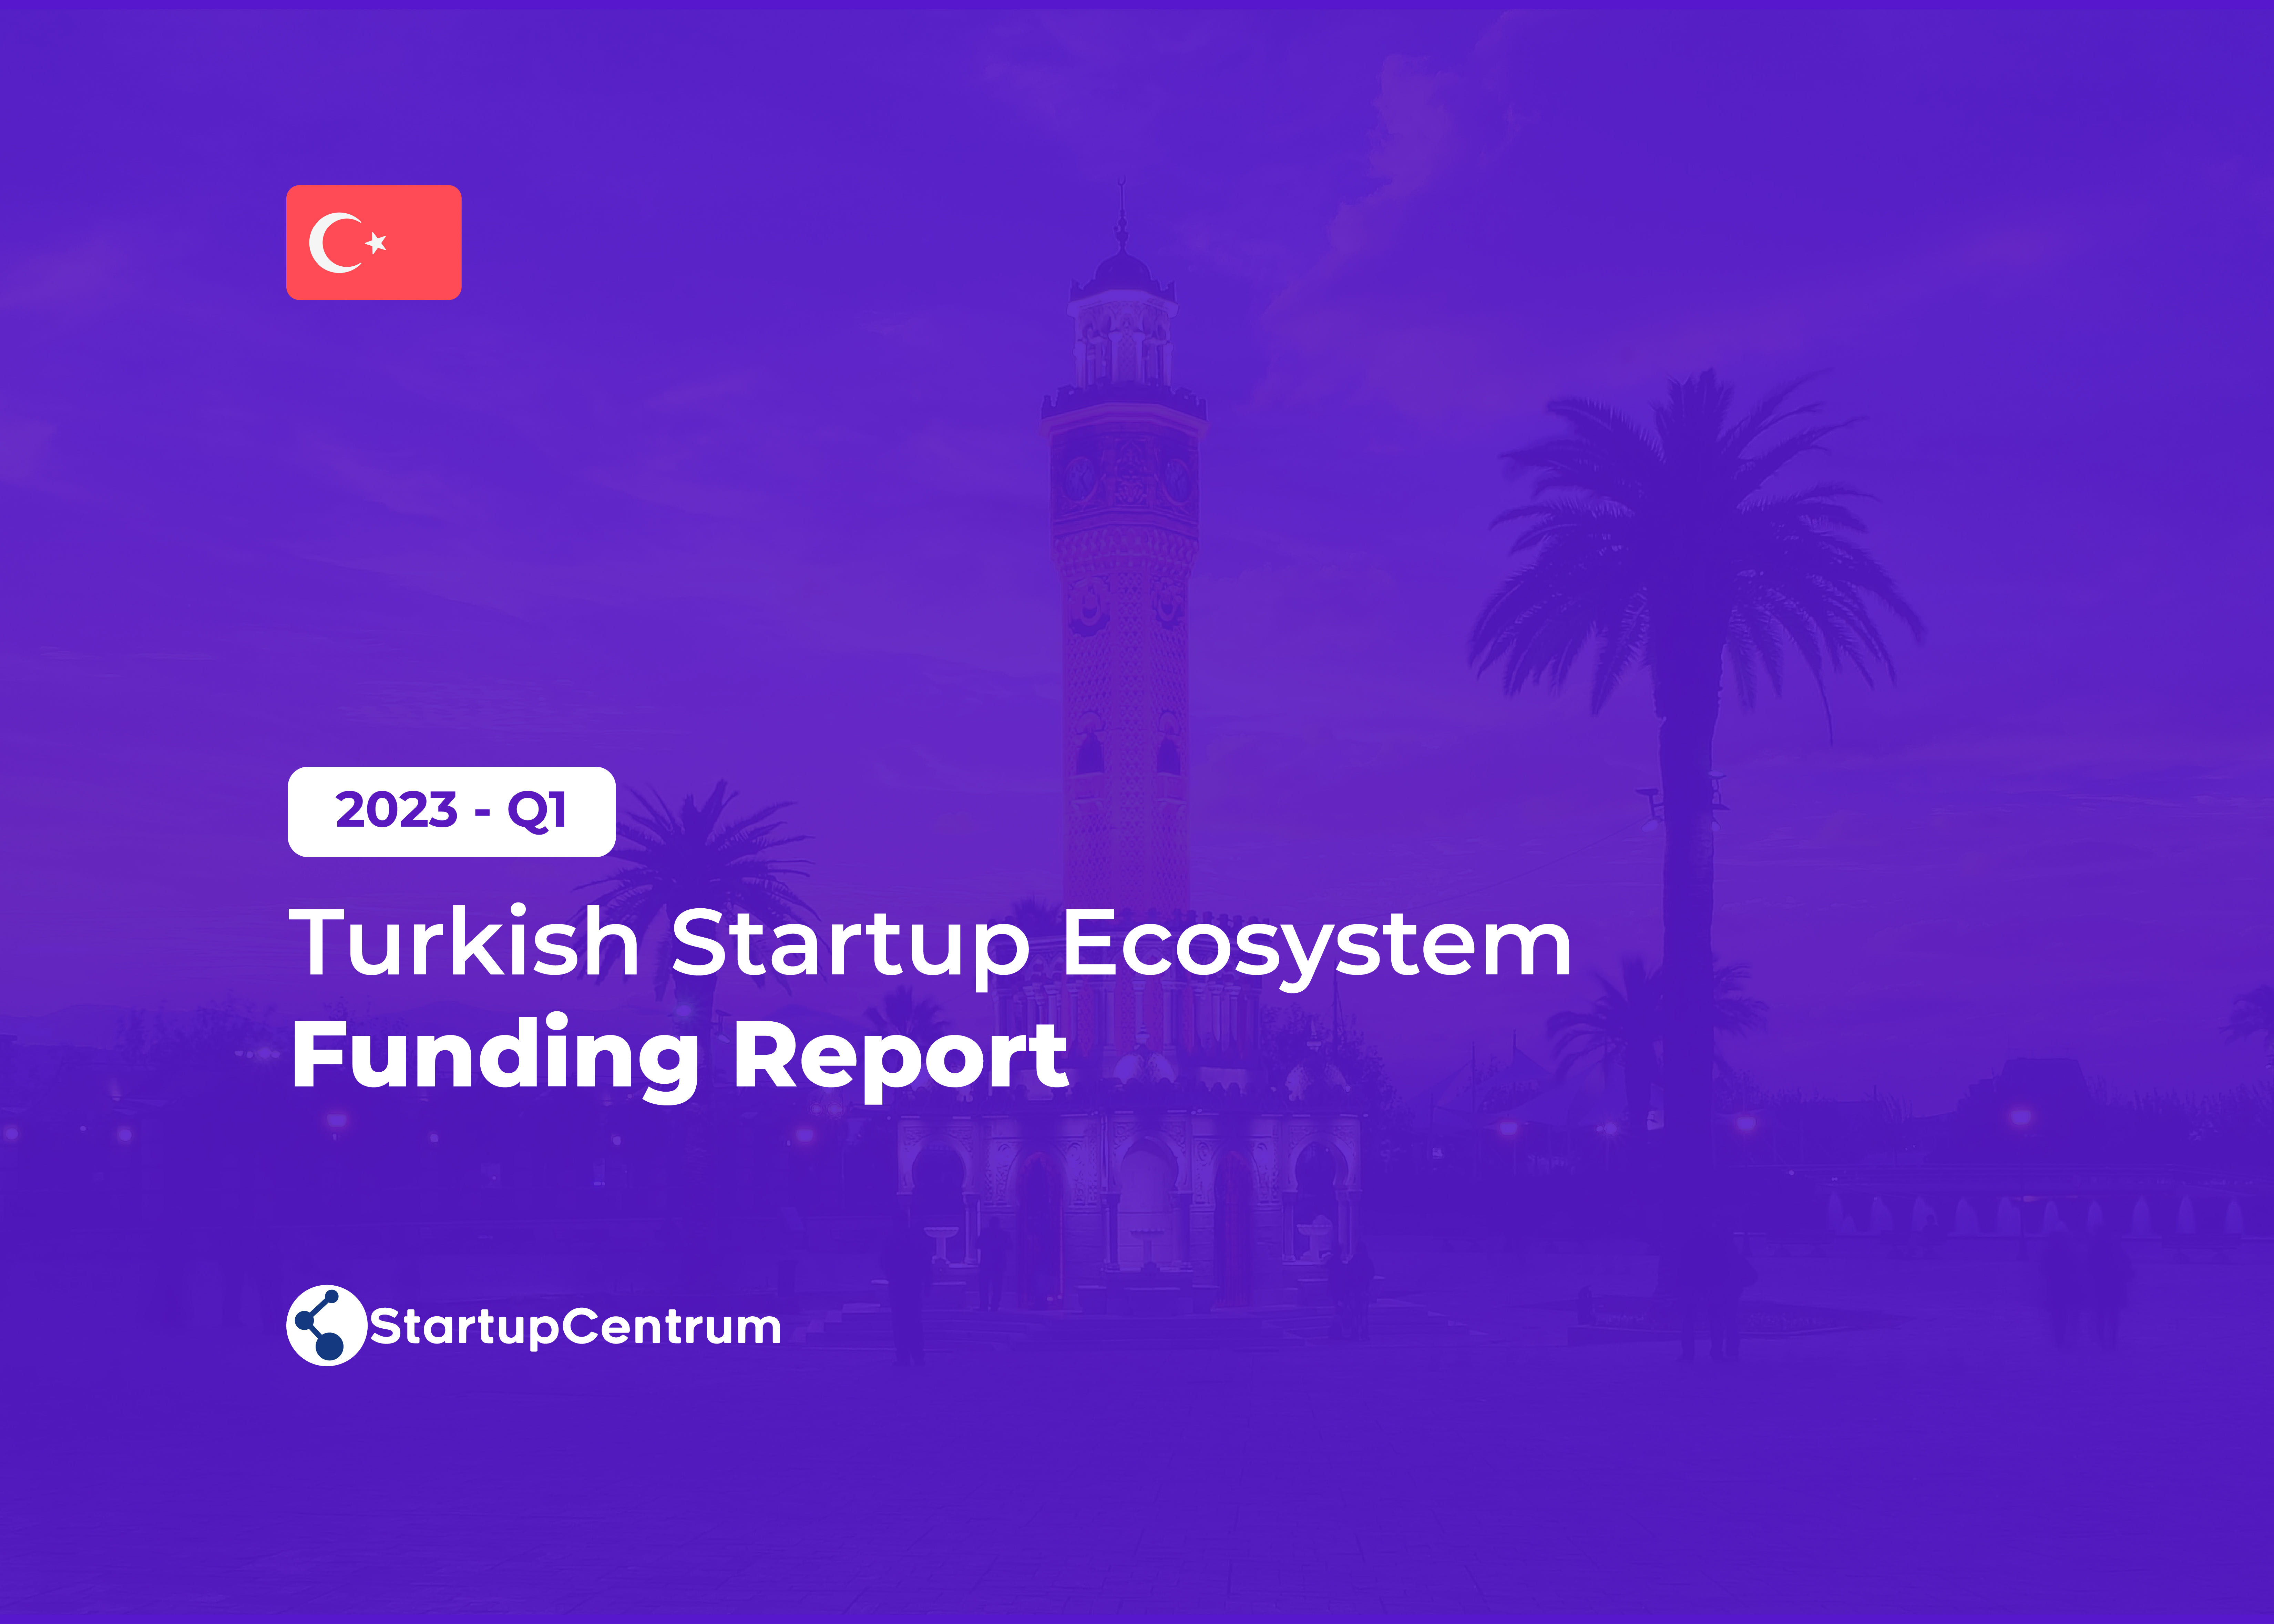 2023 - Q1 Turkish Startup Ecosystem Investment Report Cover Image